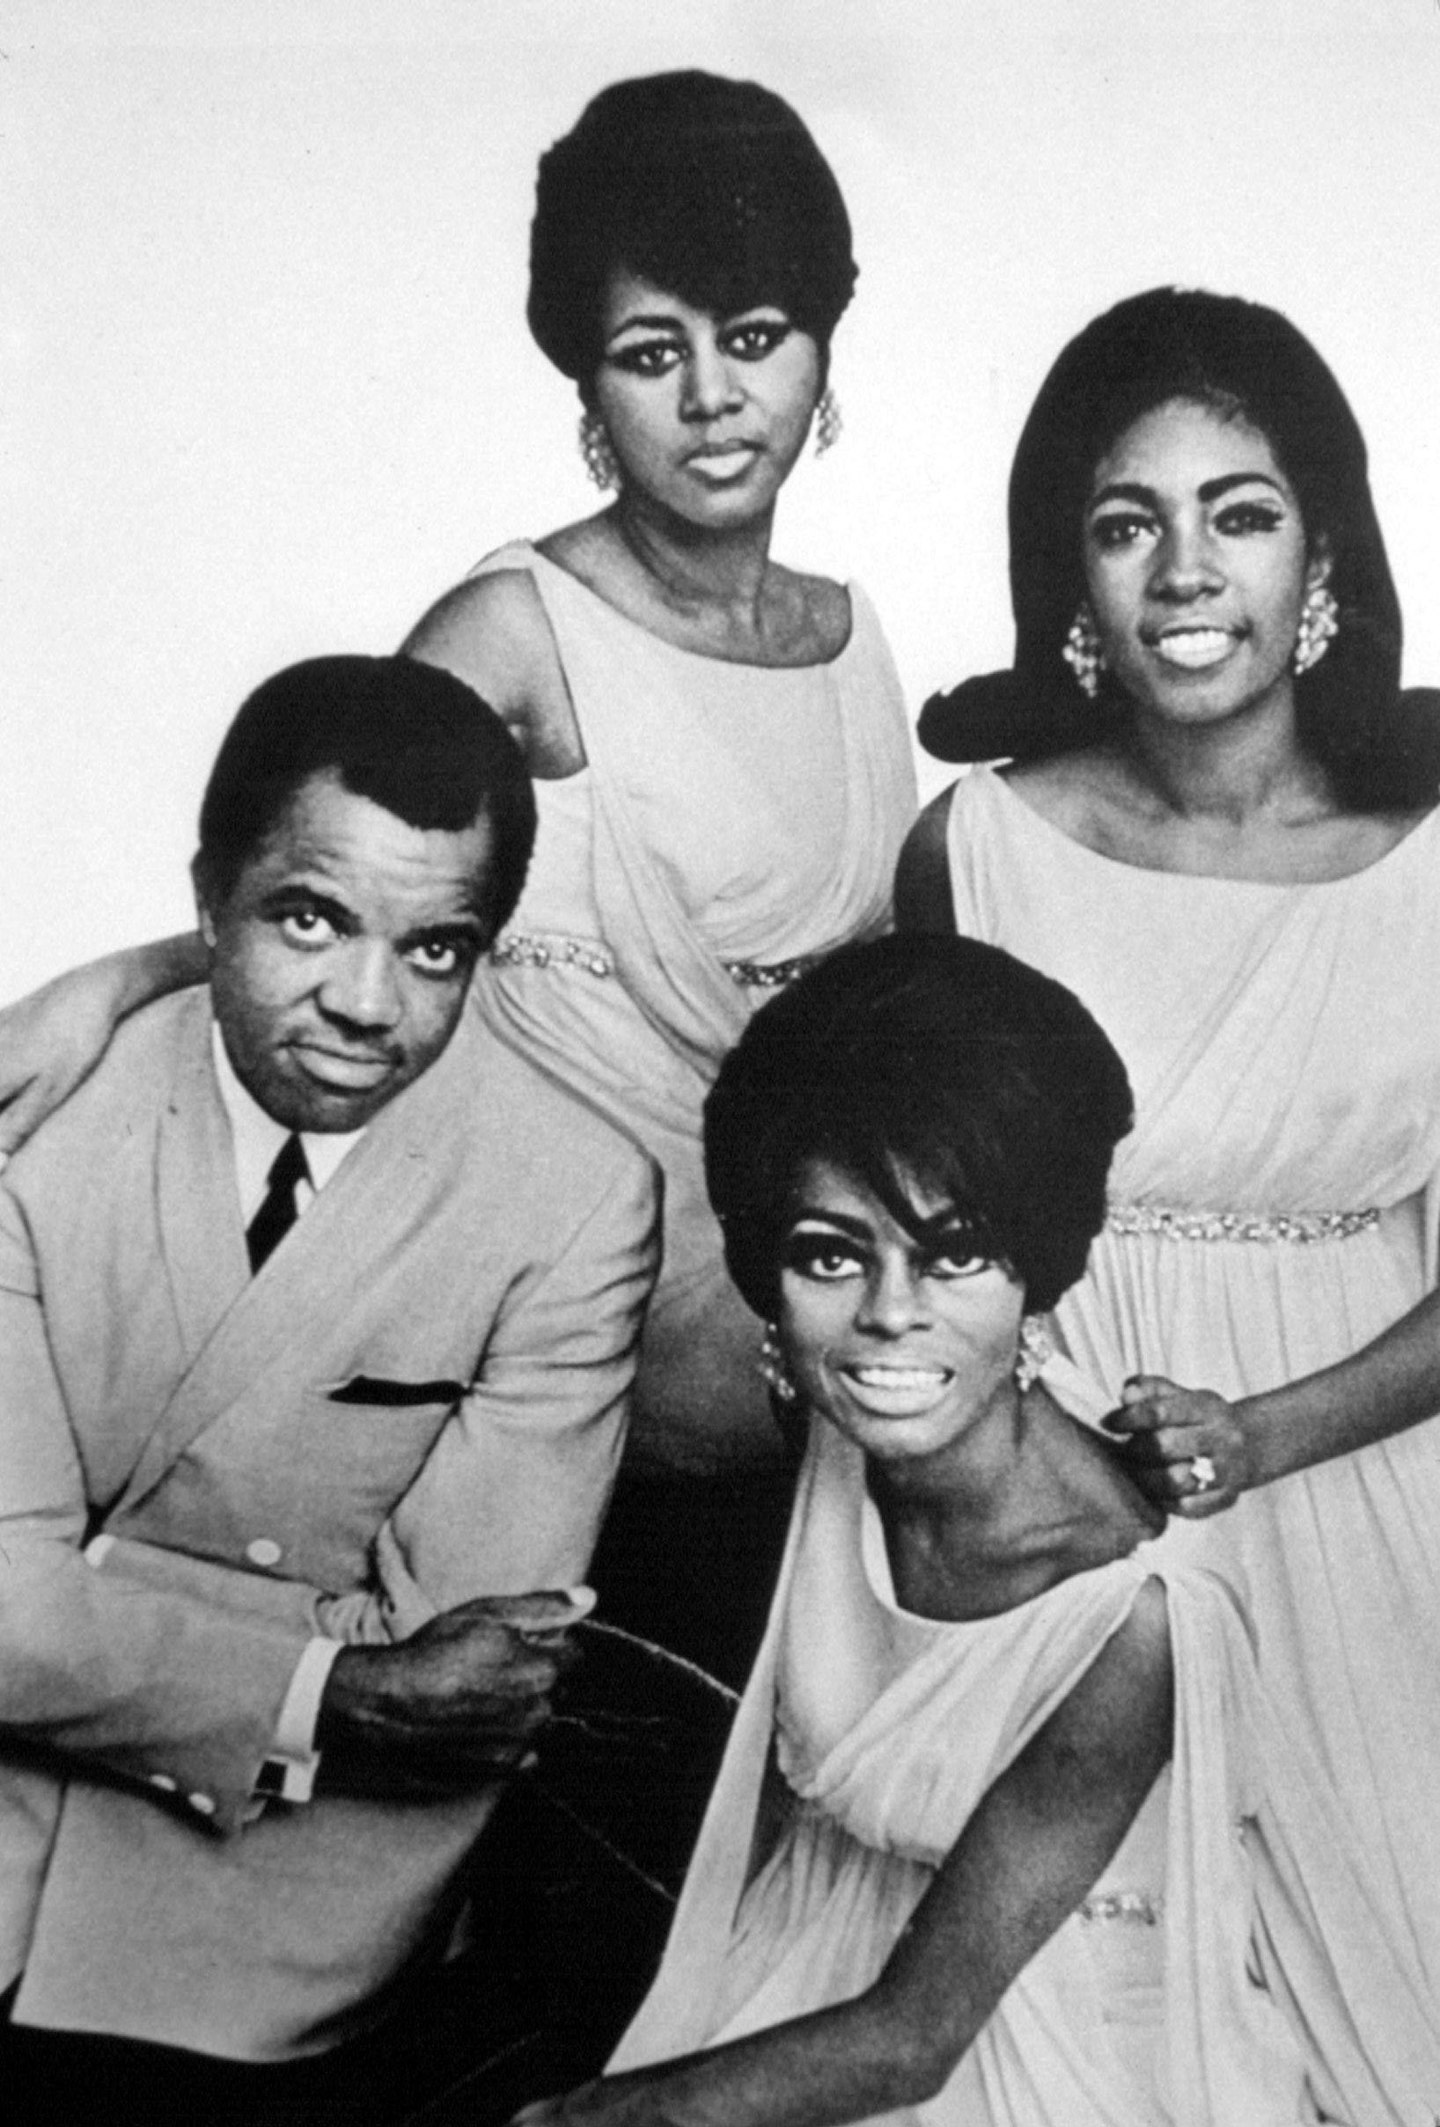 Berry Gordy and The Supremes